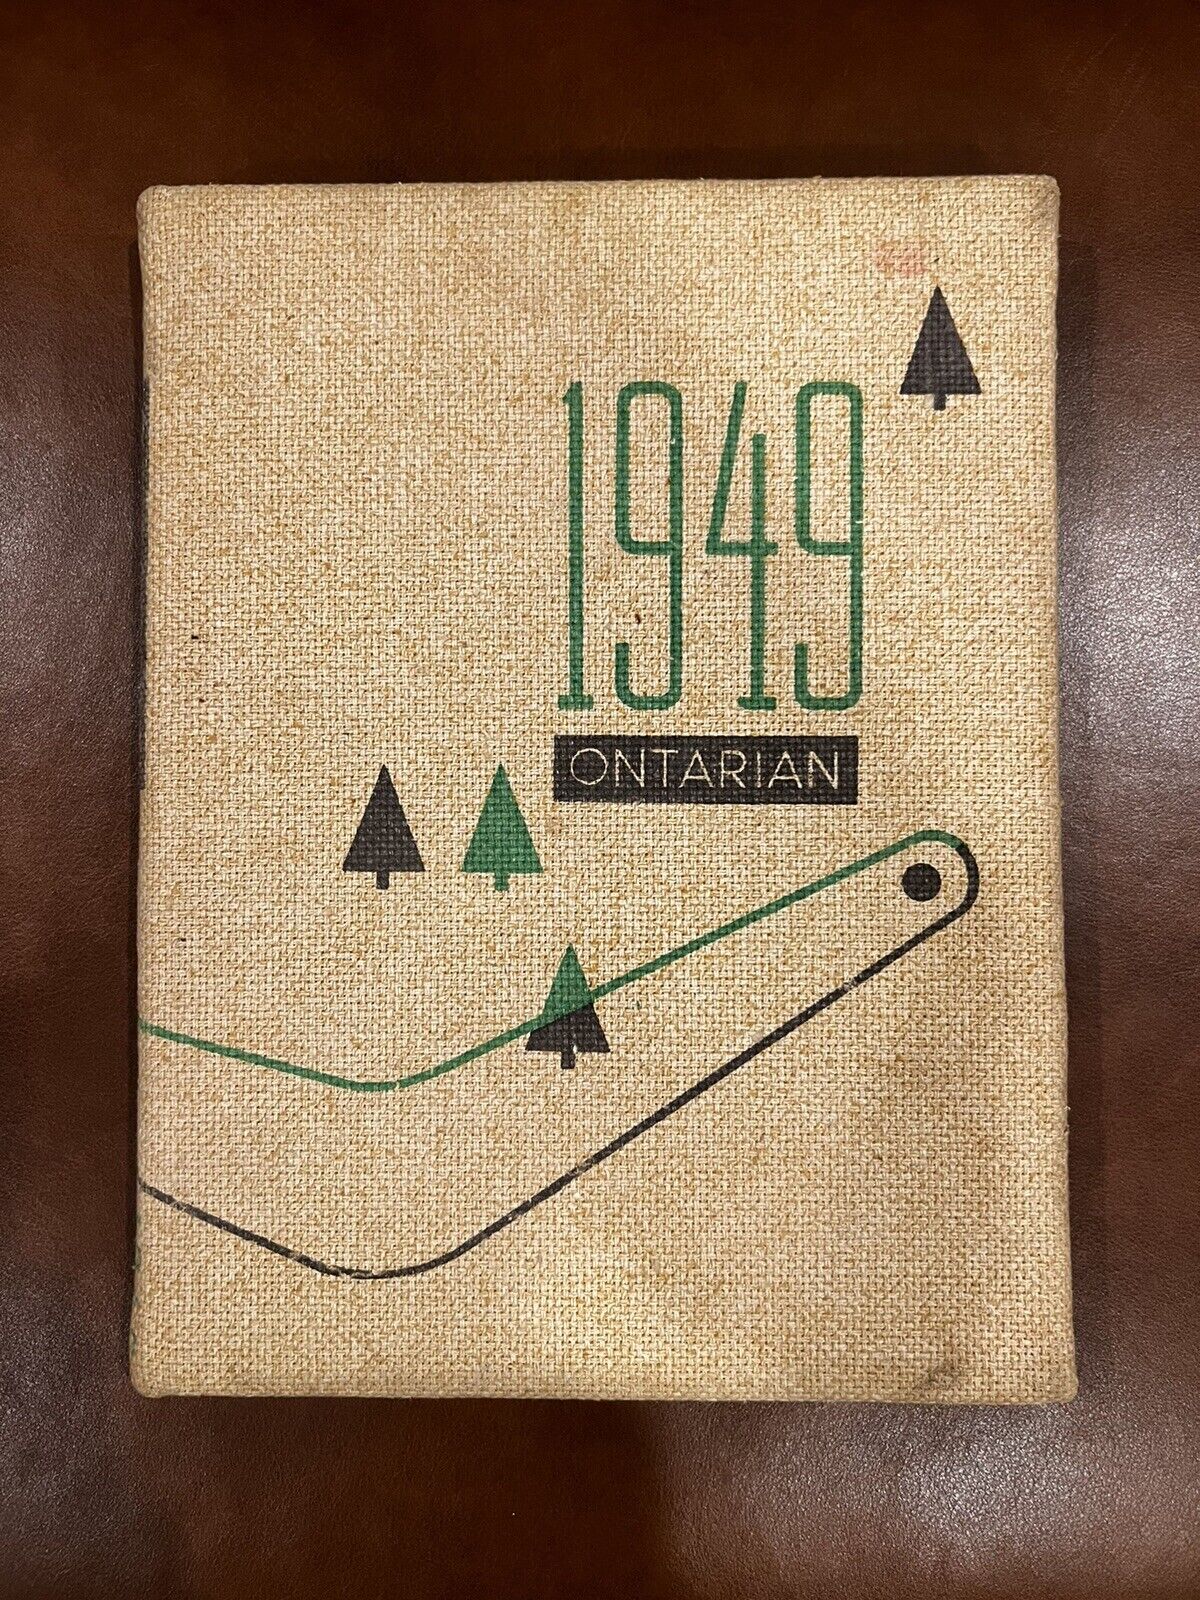 Vintage 1949 Ontarian - State Teacher's College Yearbook - Oswego, NY IDENTIFIED